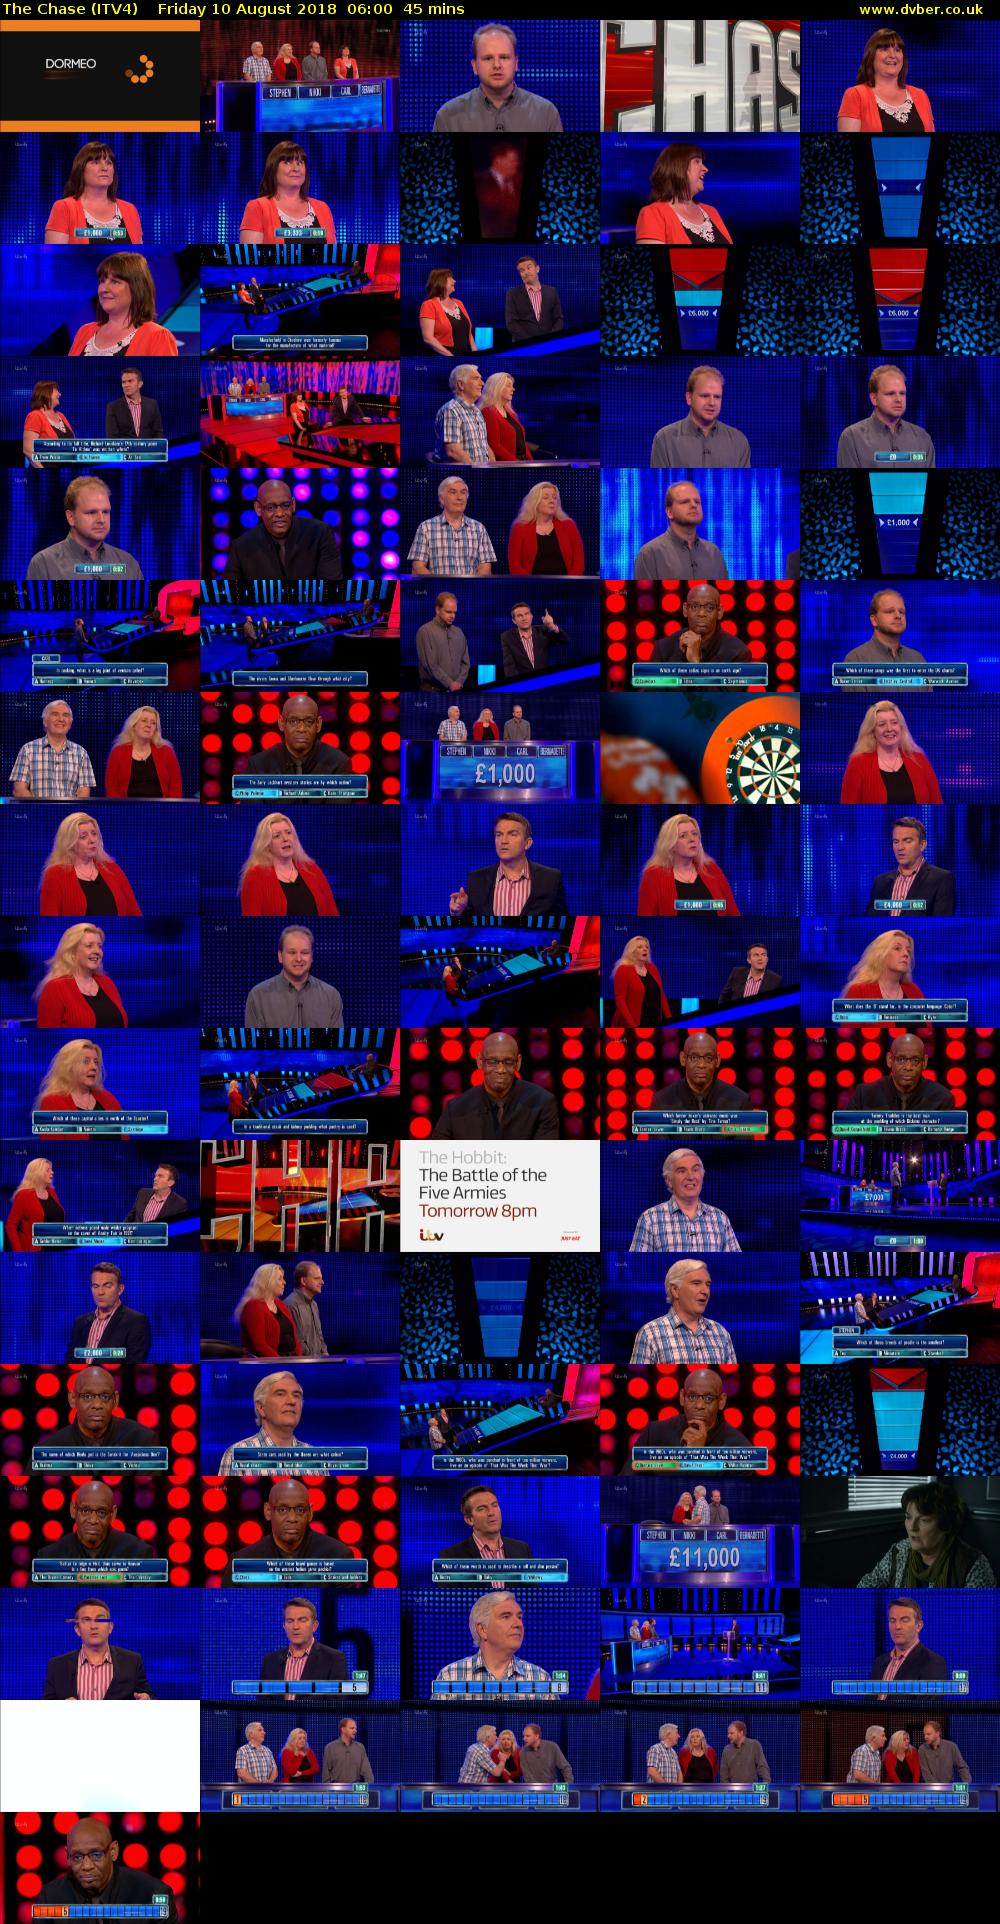 The Chase (ITV4) Friday 10 August 2018 06:00 - 06:45